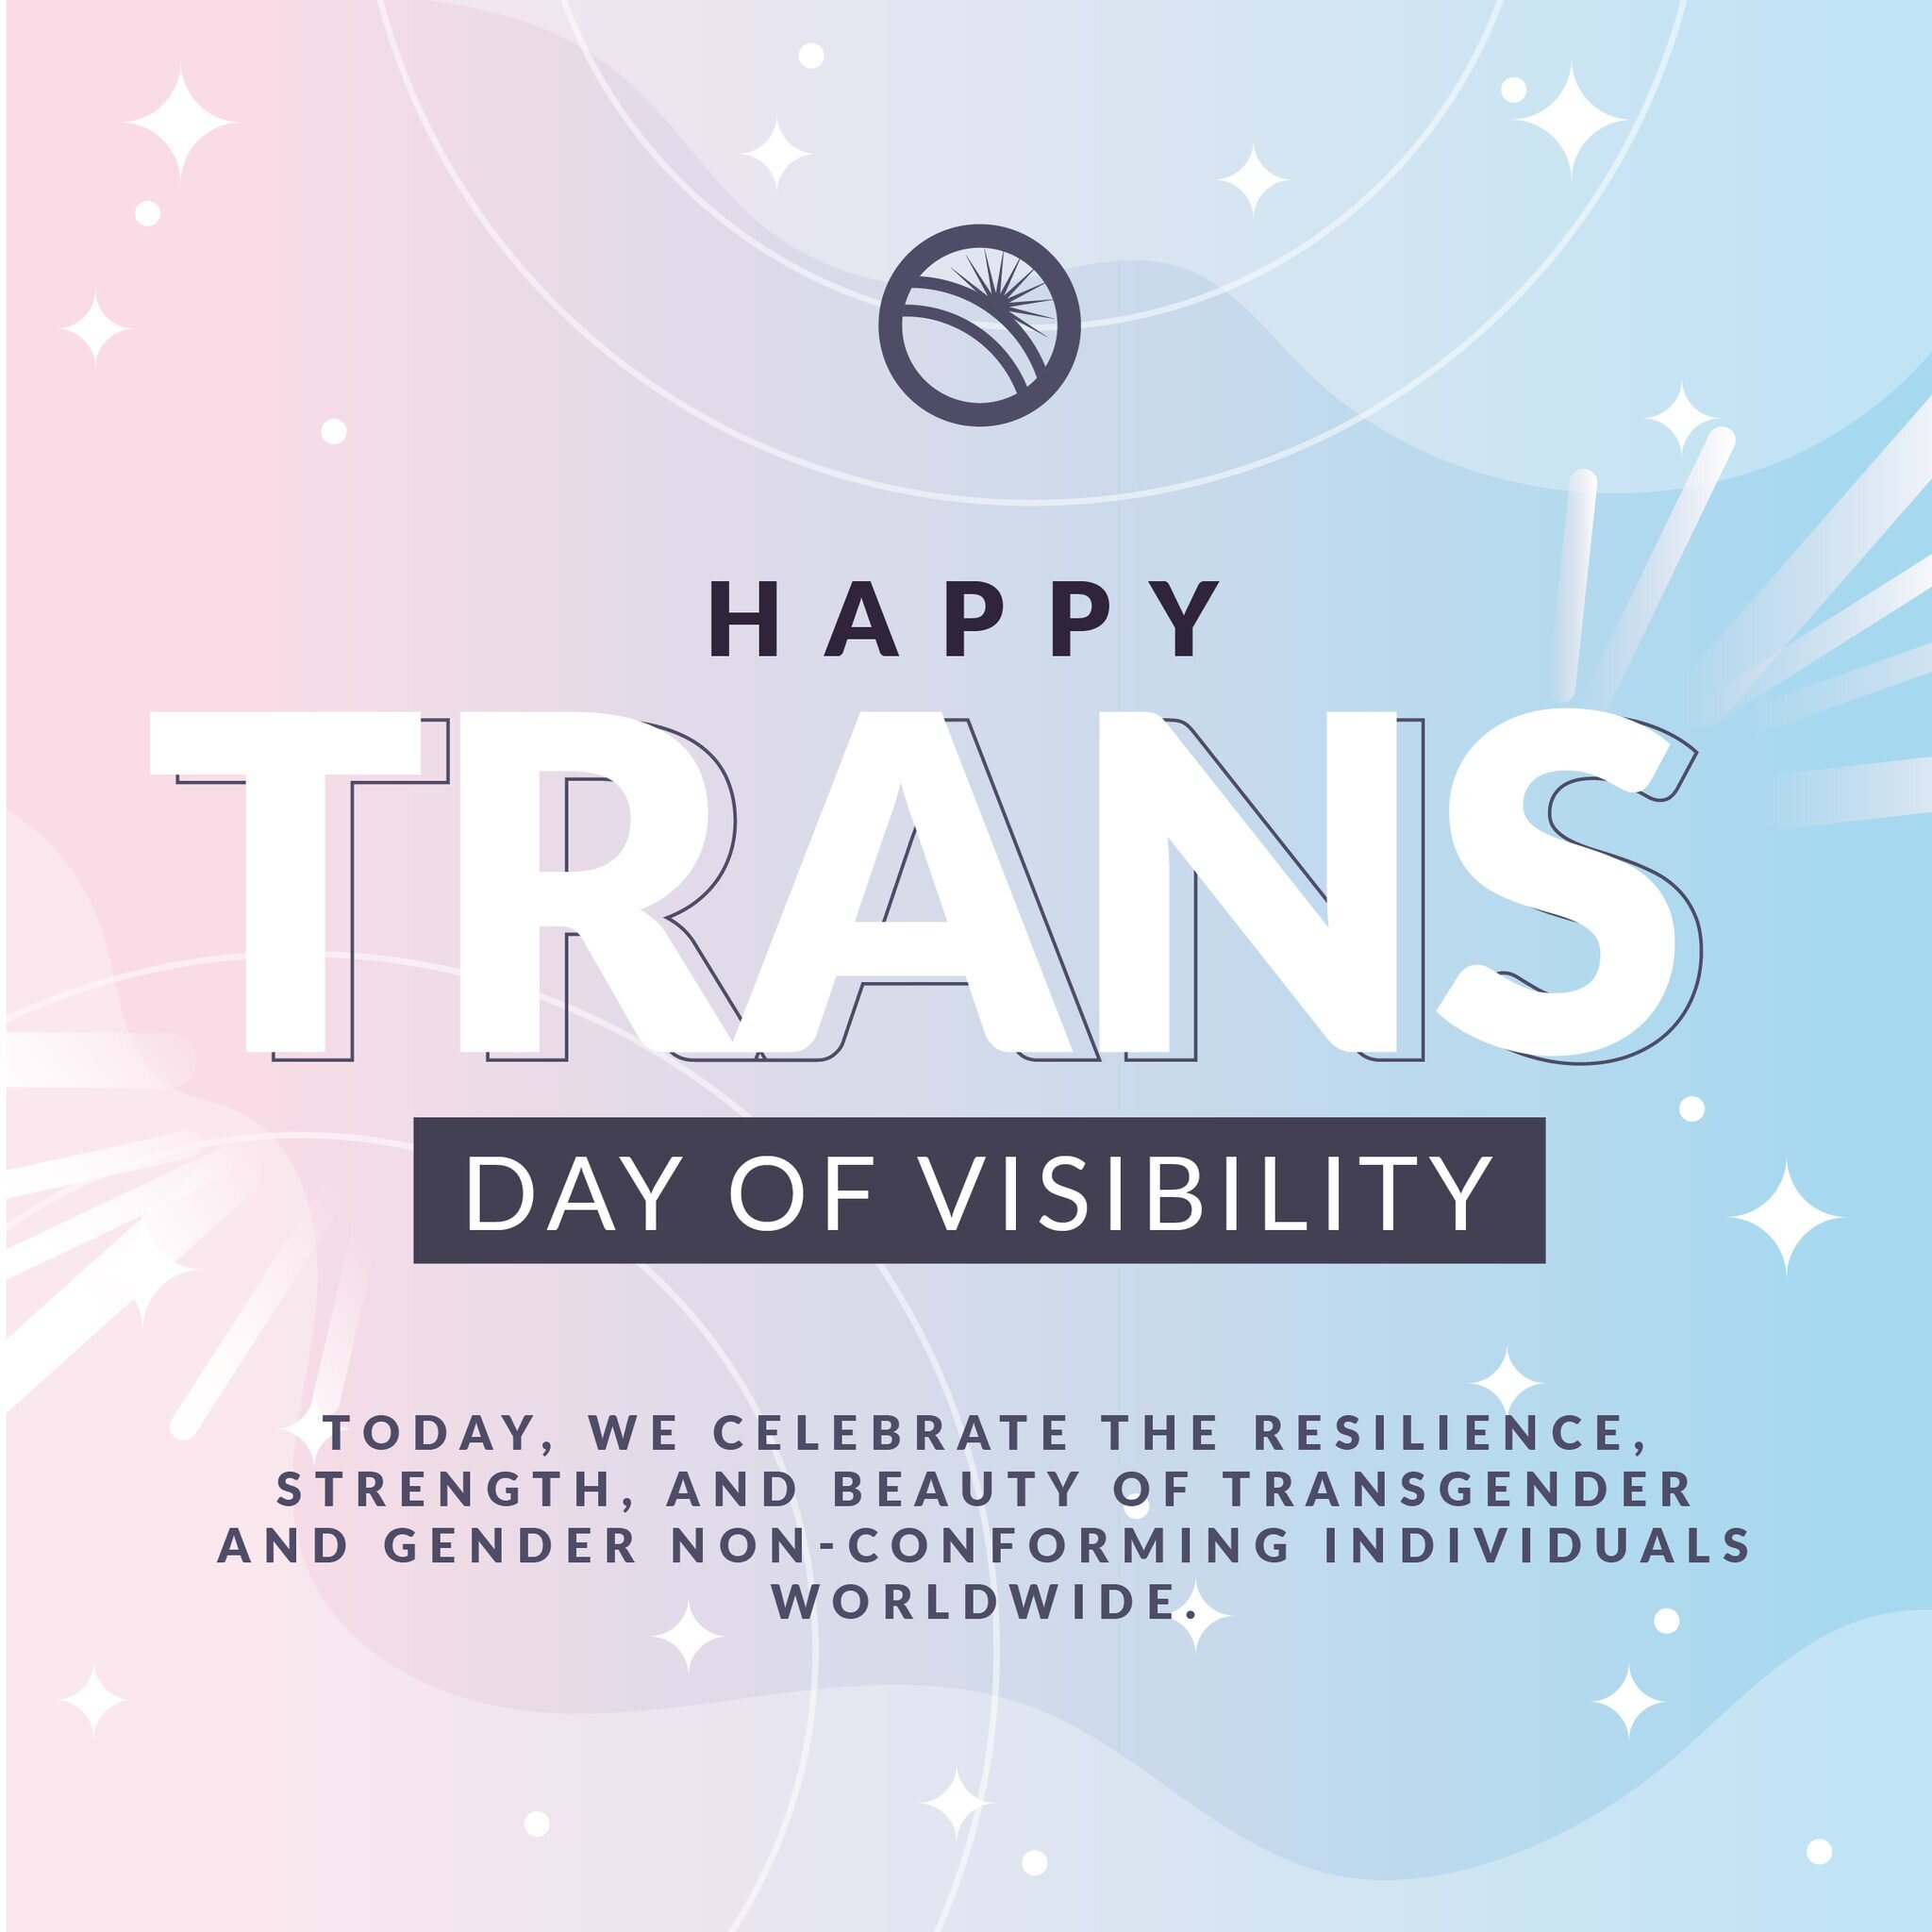 Just as Easter symbolizes renewal, rebirth, and the triumph of light over darkness, today we honor the journey of transgender individuals who courageously navigate a world that often misunderstands and marginalizes them. Your visibility is not just a